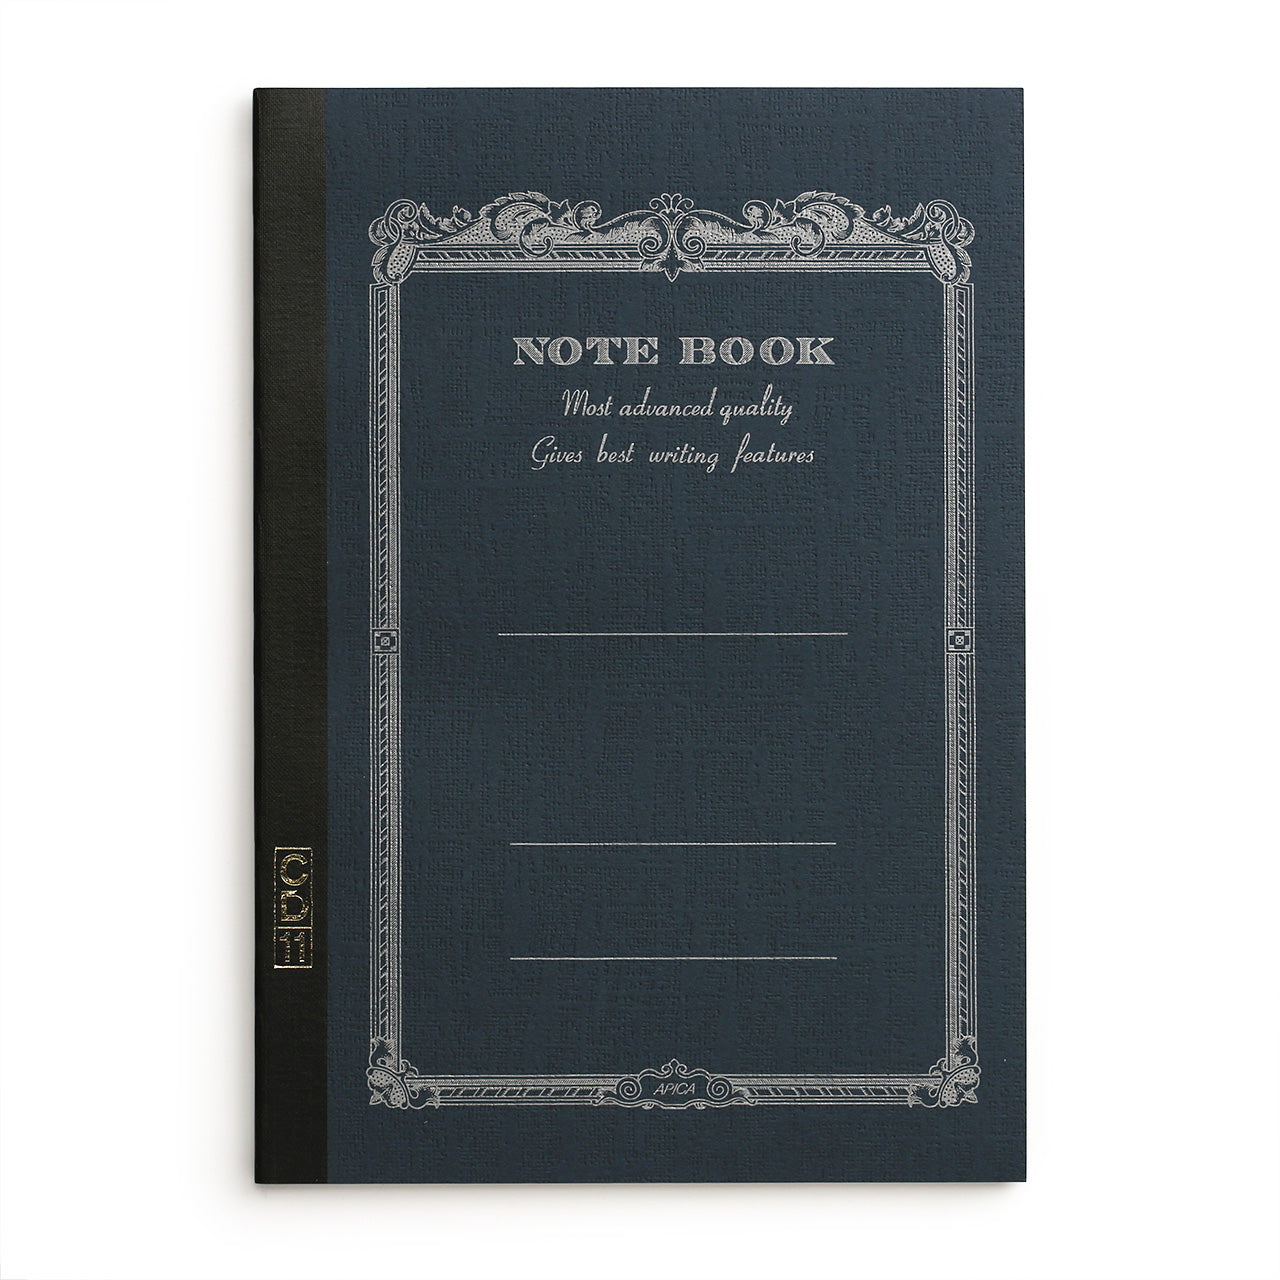 Apica smooth papered, lined notebook with  navy cover and black spine